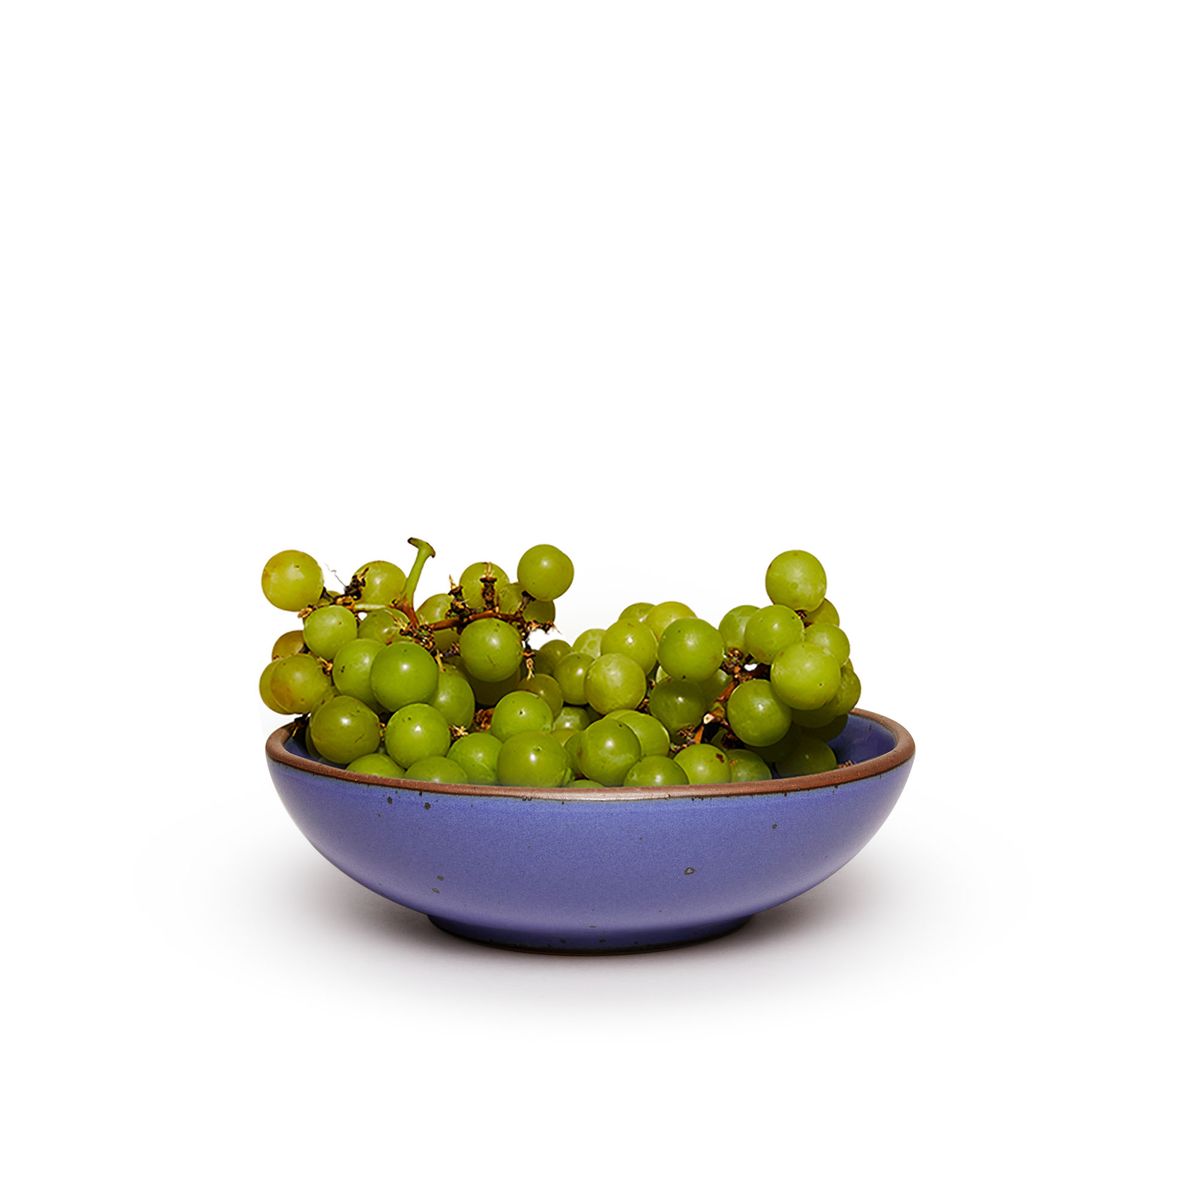 Green grapes in a dinner-sized shallow ceramic bowl in a true cool blue color featuring iron speckles and an unglazed rim